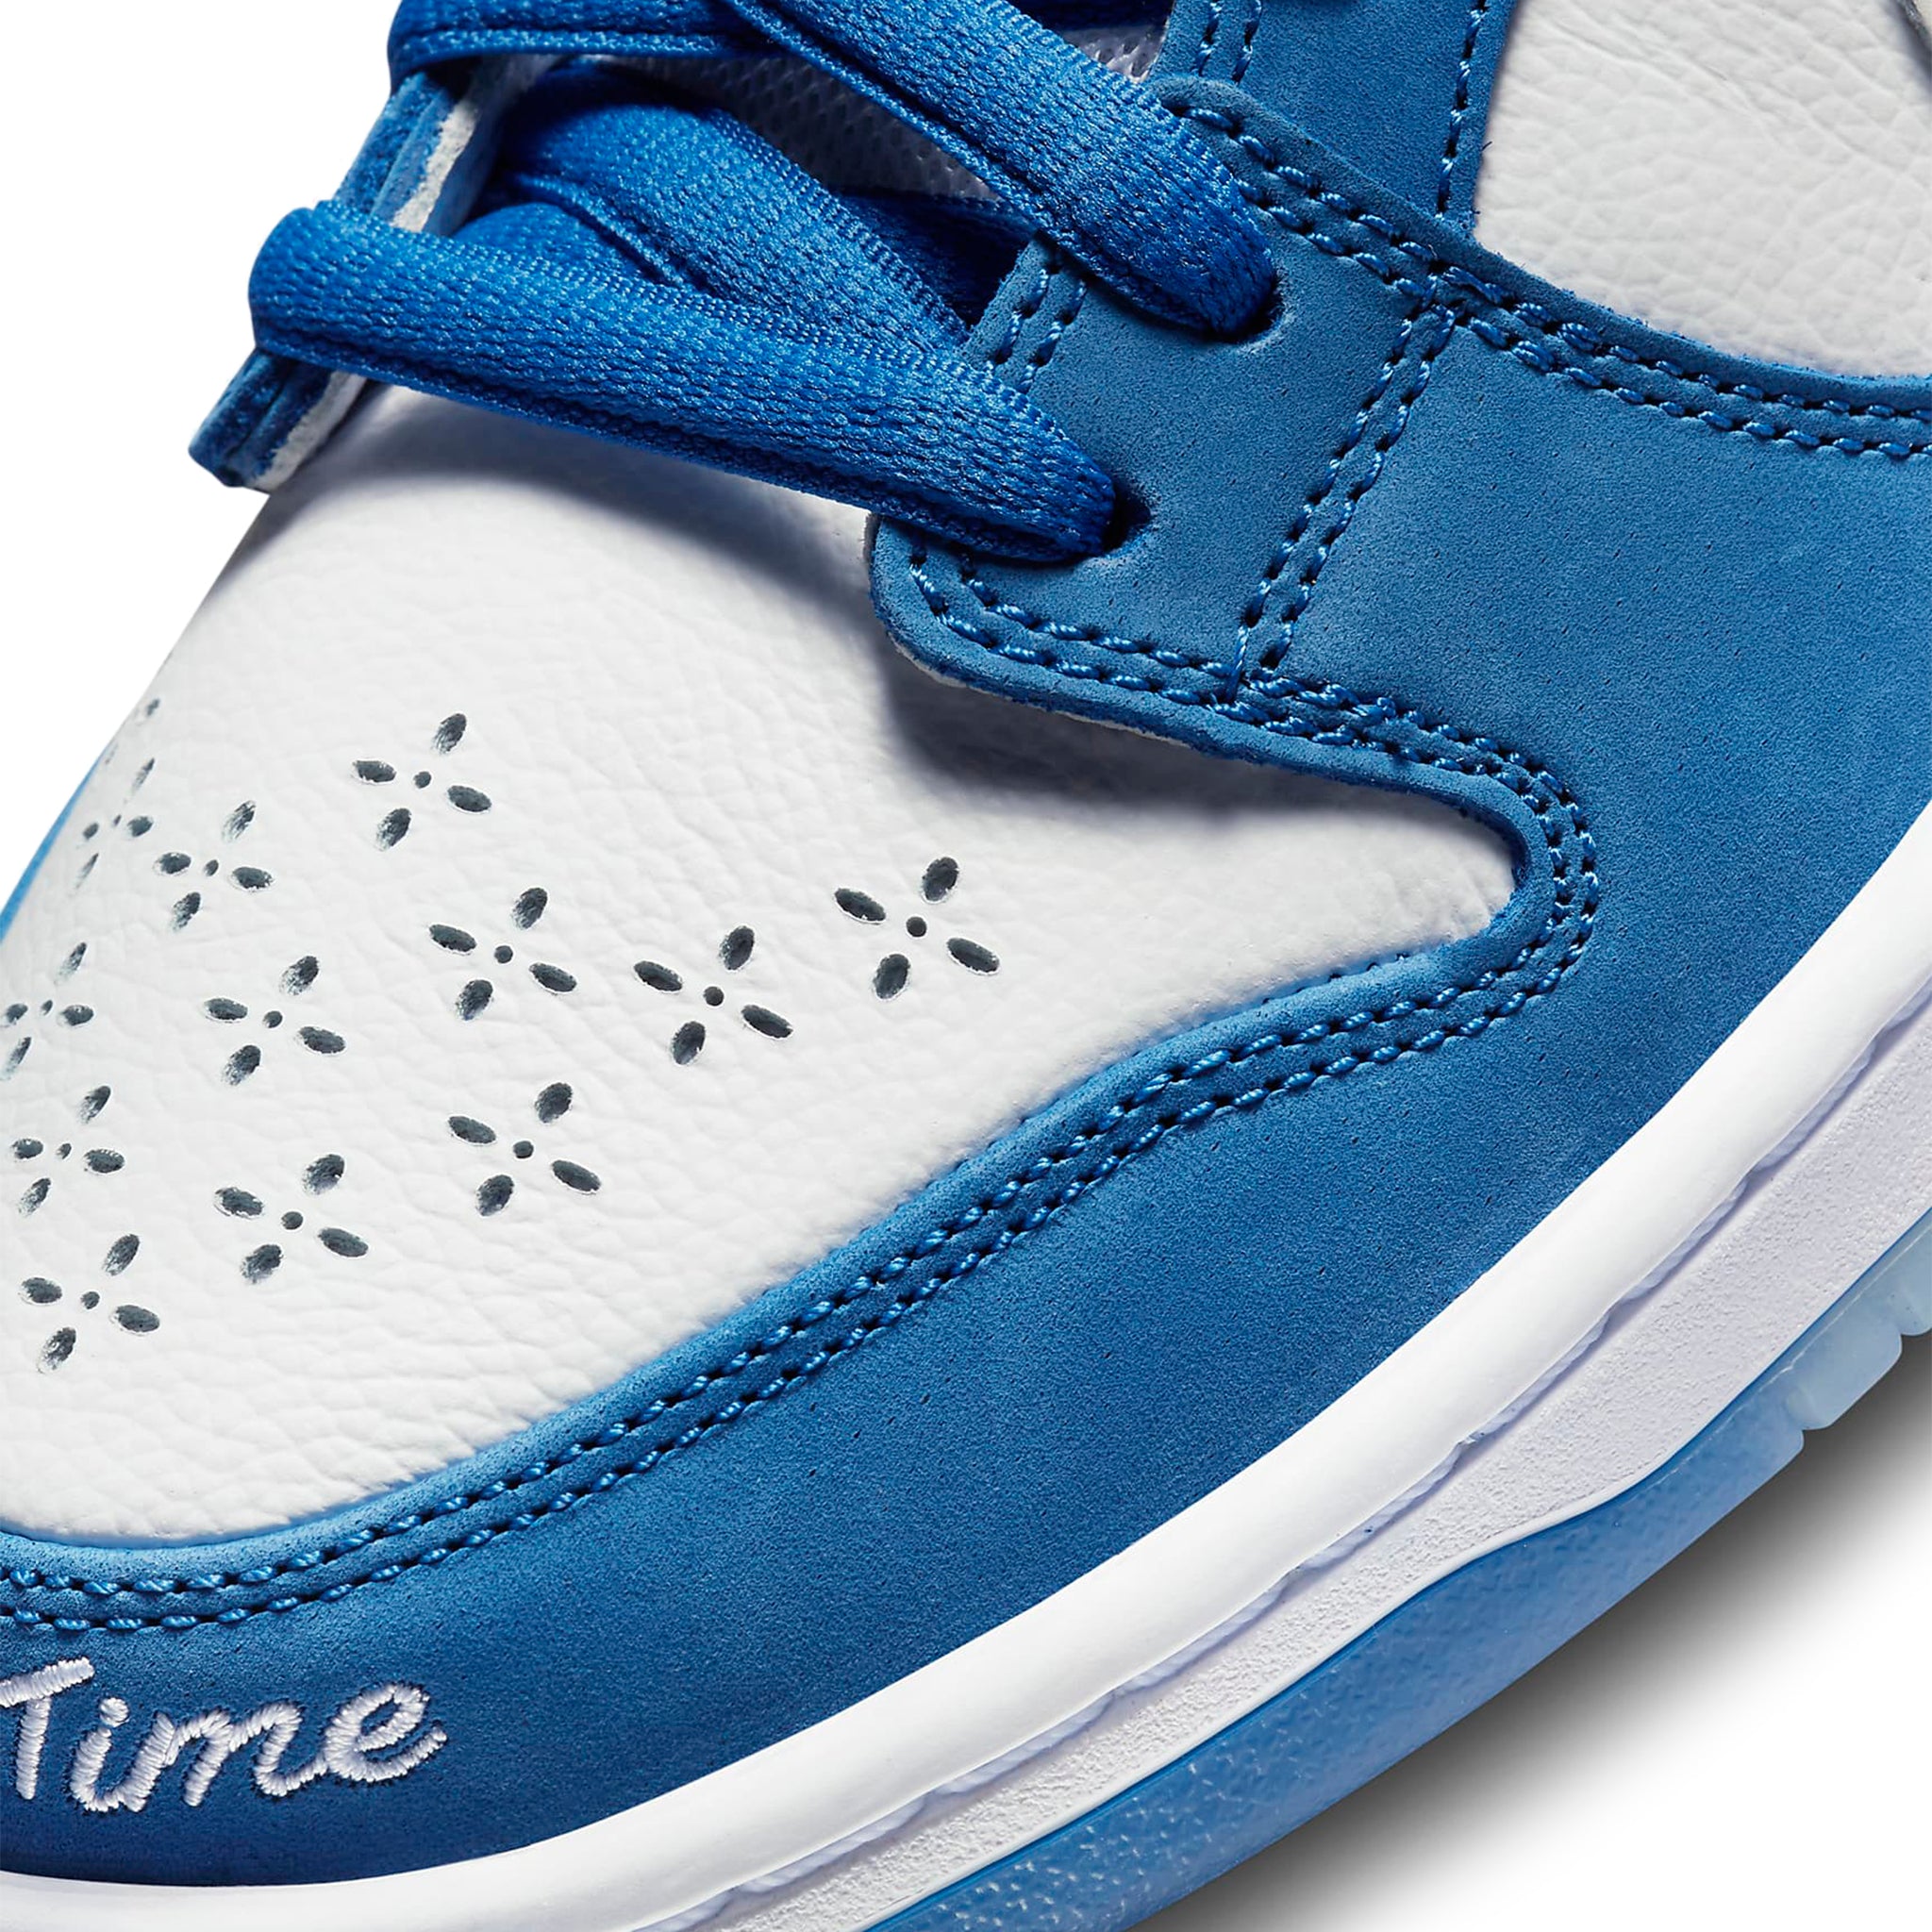 Toe box view of Born x Raised x Nike SB Dunk Low One Block at a Time FN7819-400